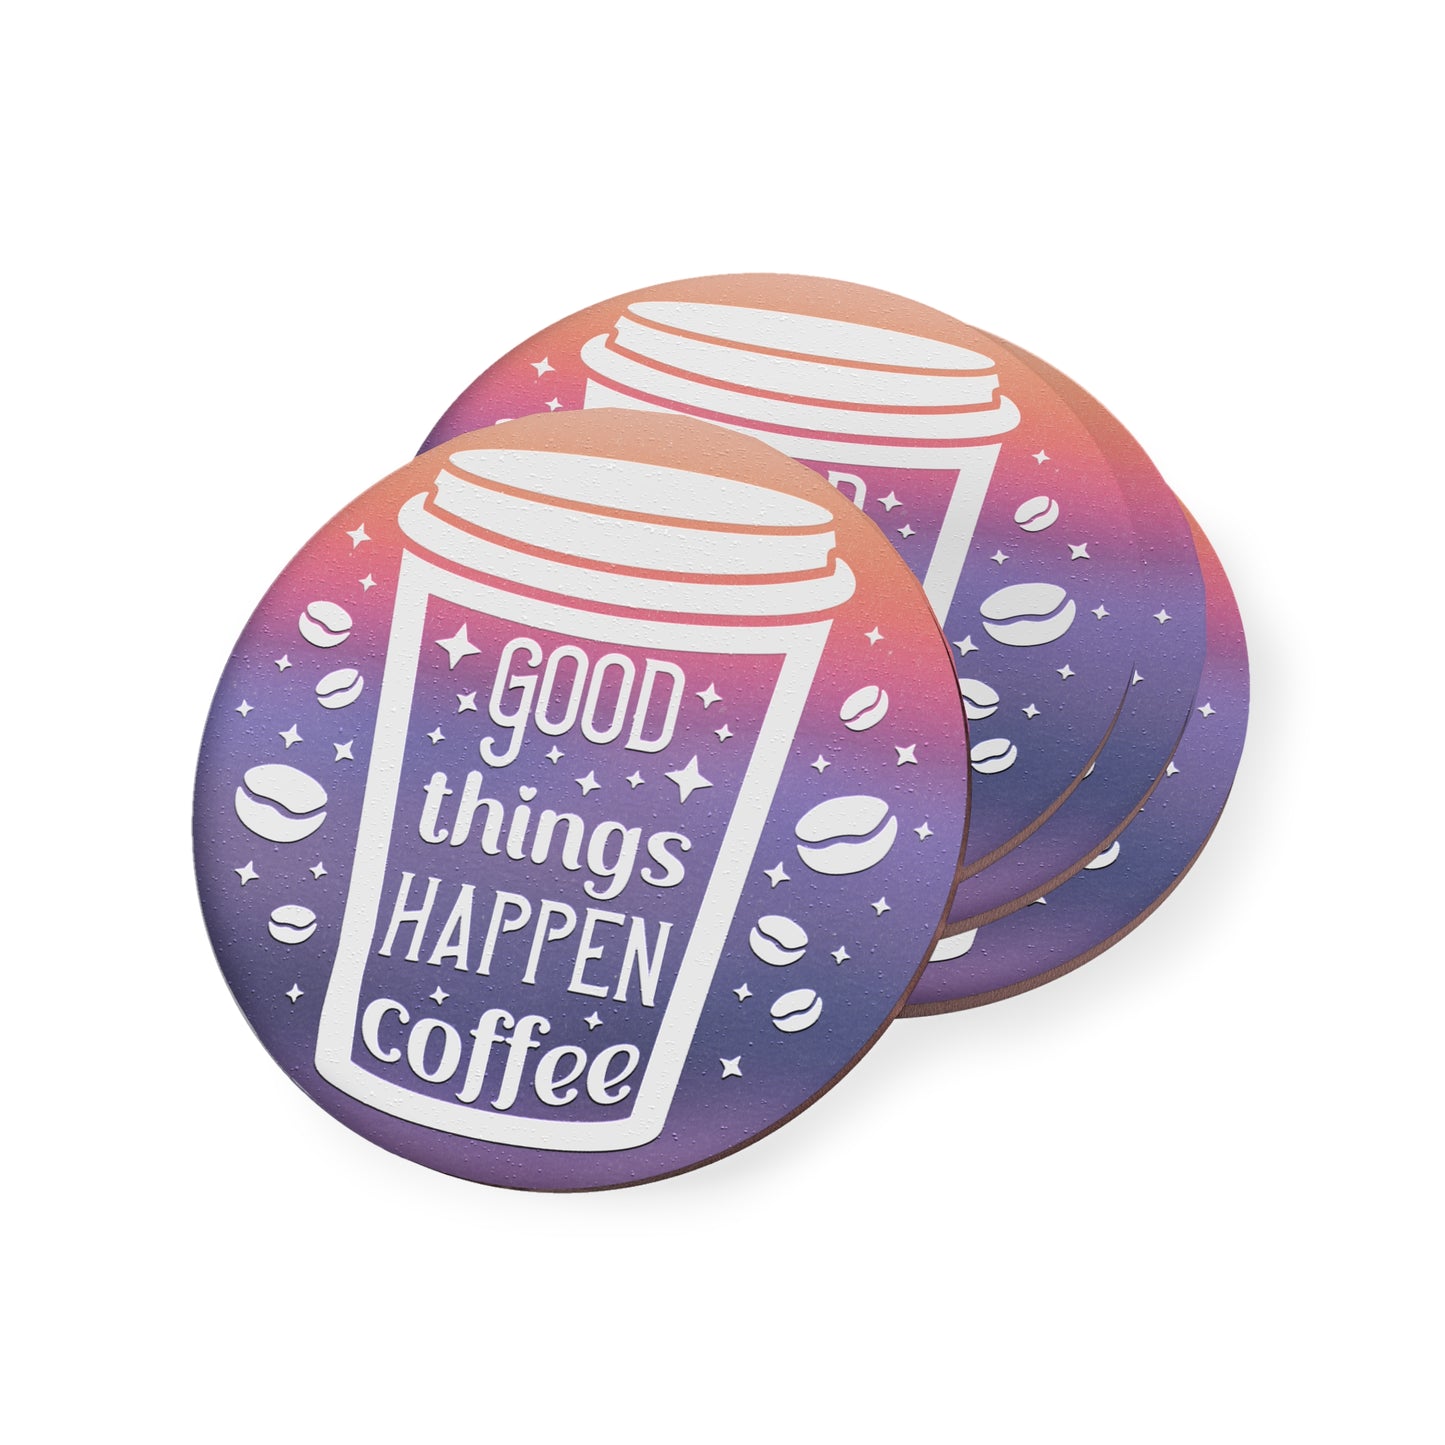 " Good Things Happen Coffee " Round Coasters